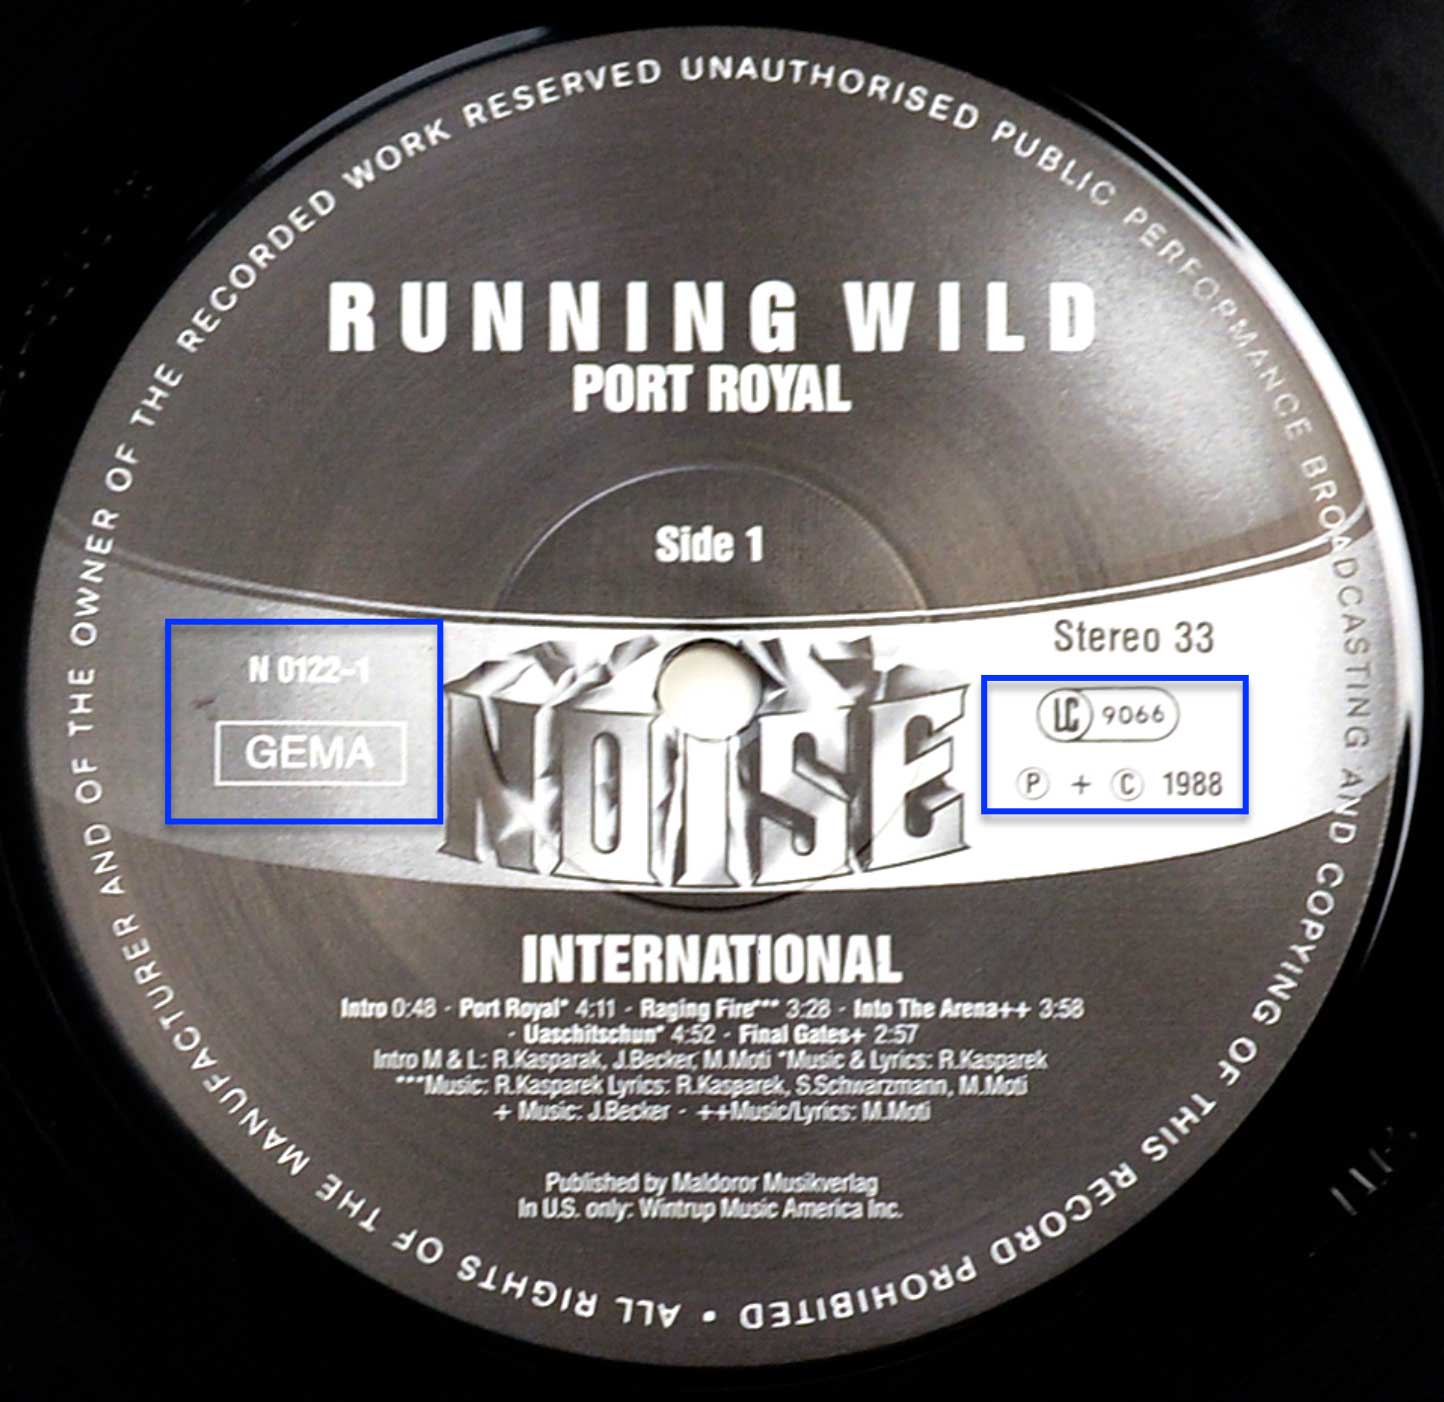 Photo of record label of RUNNING WILD - Port Royal 